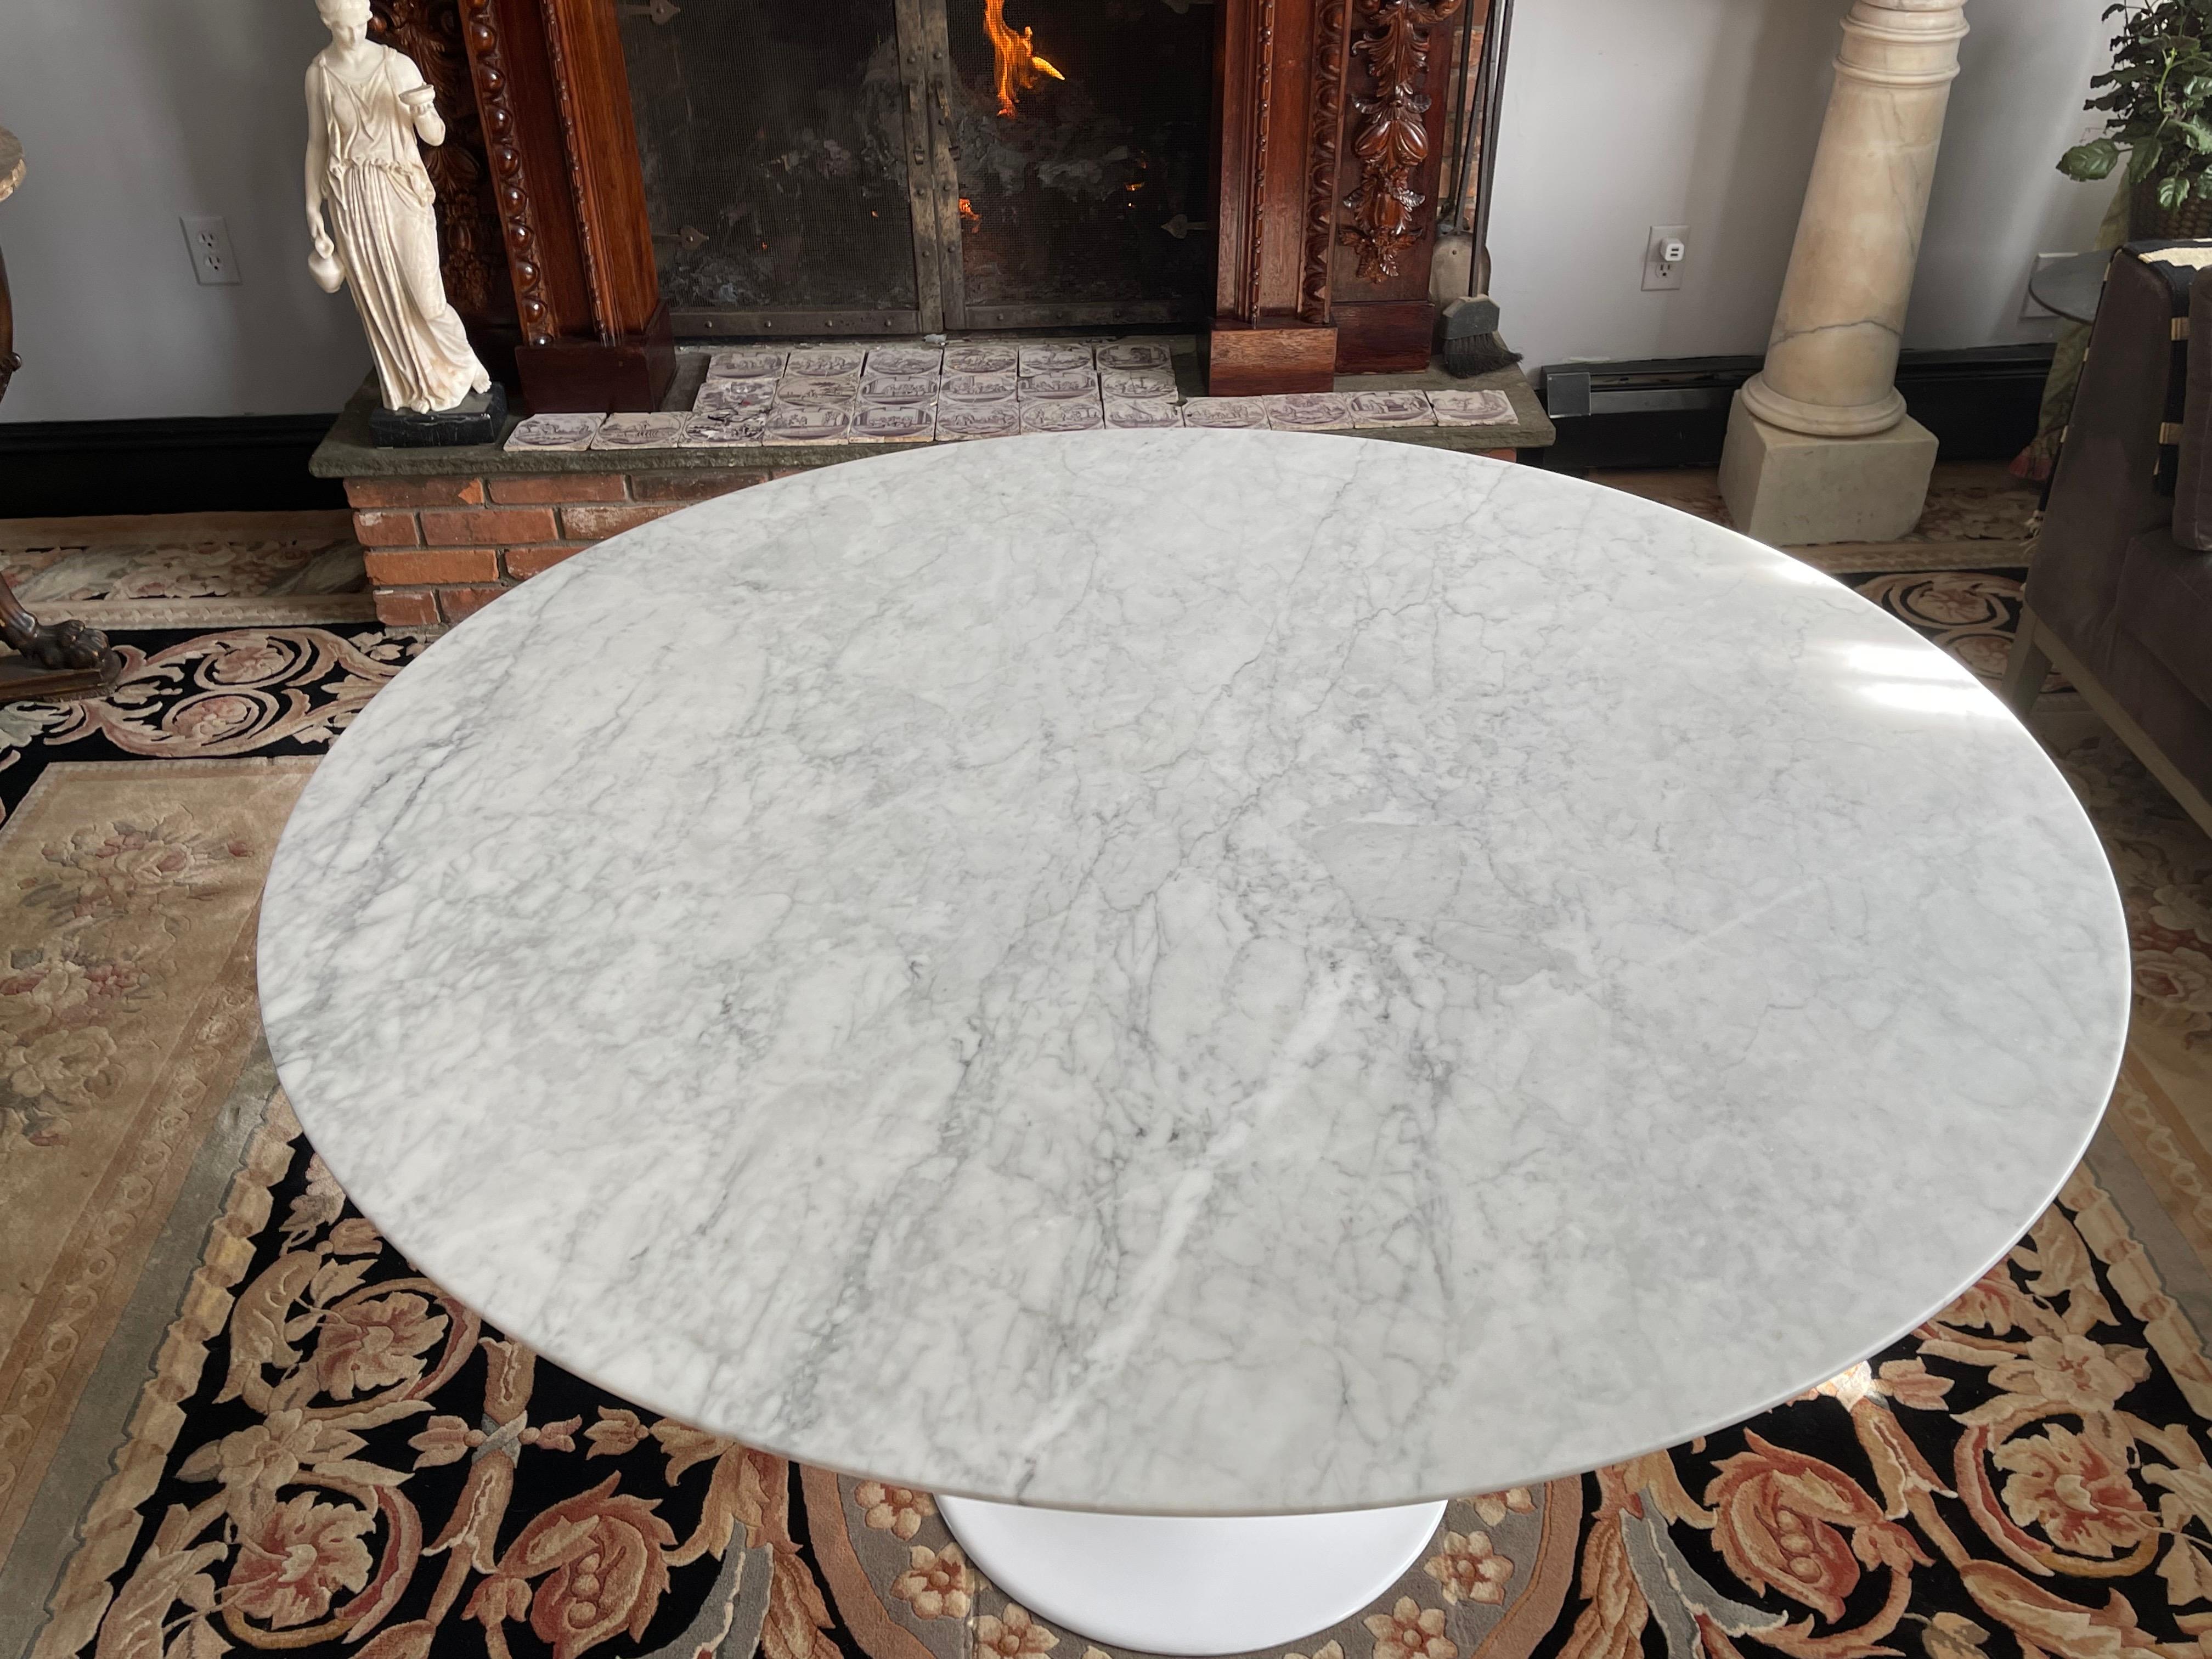 Mid-Century Modern Round Carrara Marble Dining Table after Eero Saarinen’s “Tulip Table” for Knoll  For Sale